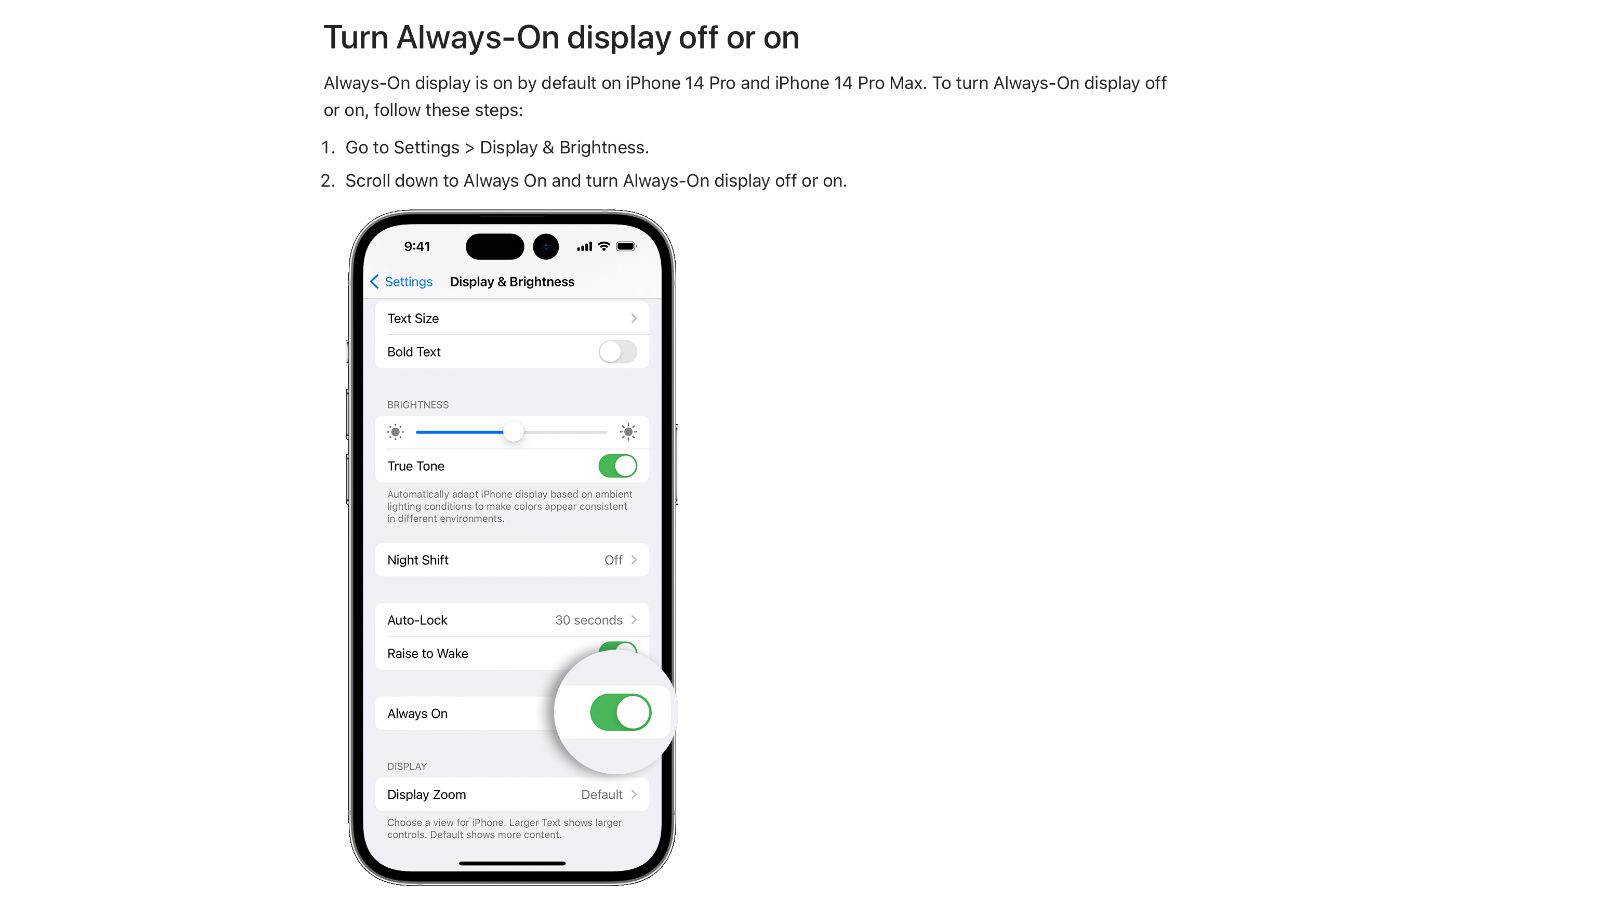 iPhone 14 Pro always on display support document